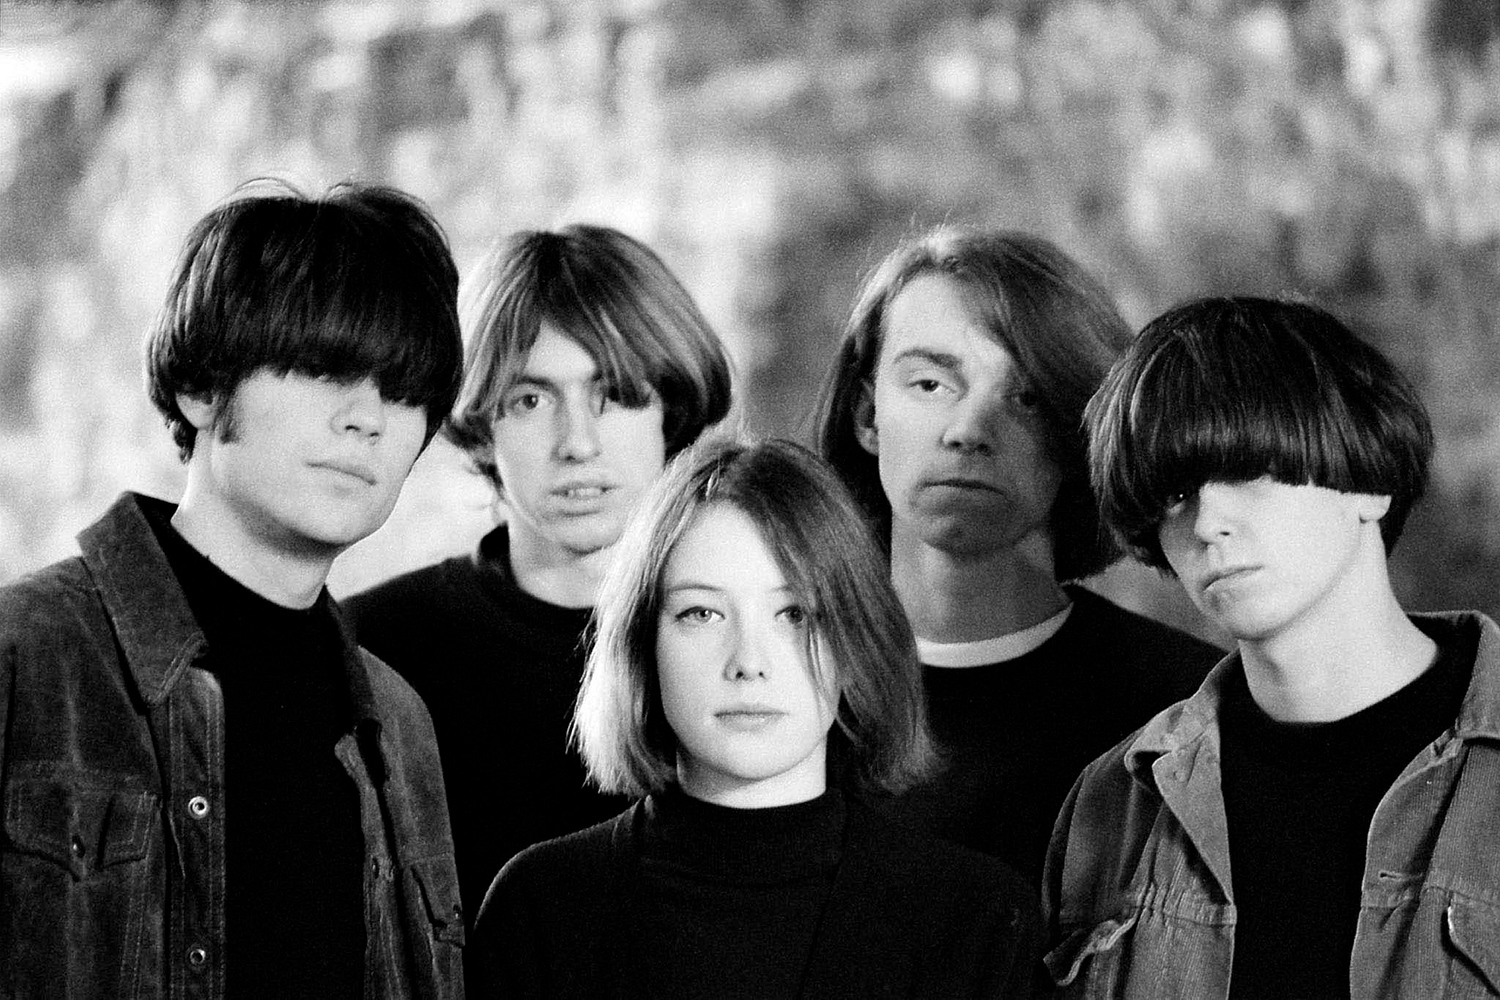 Members of Editors, Slowdive and Mogwai form new band Minor Victories